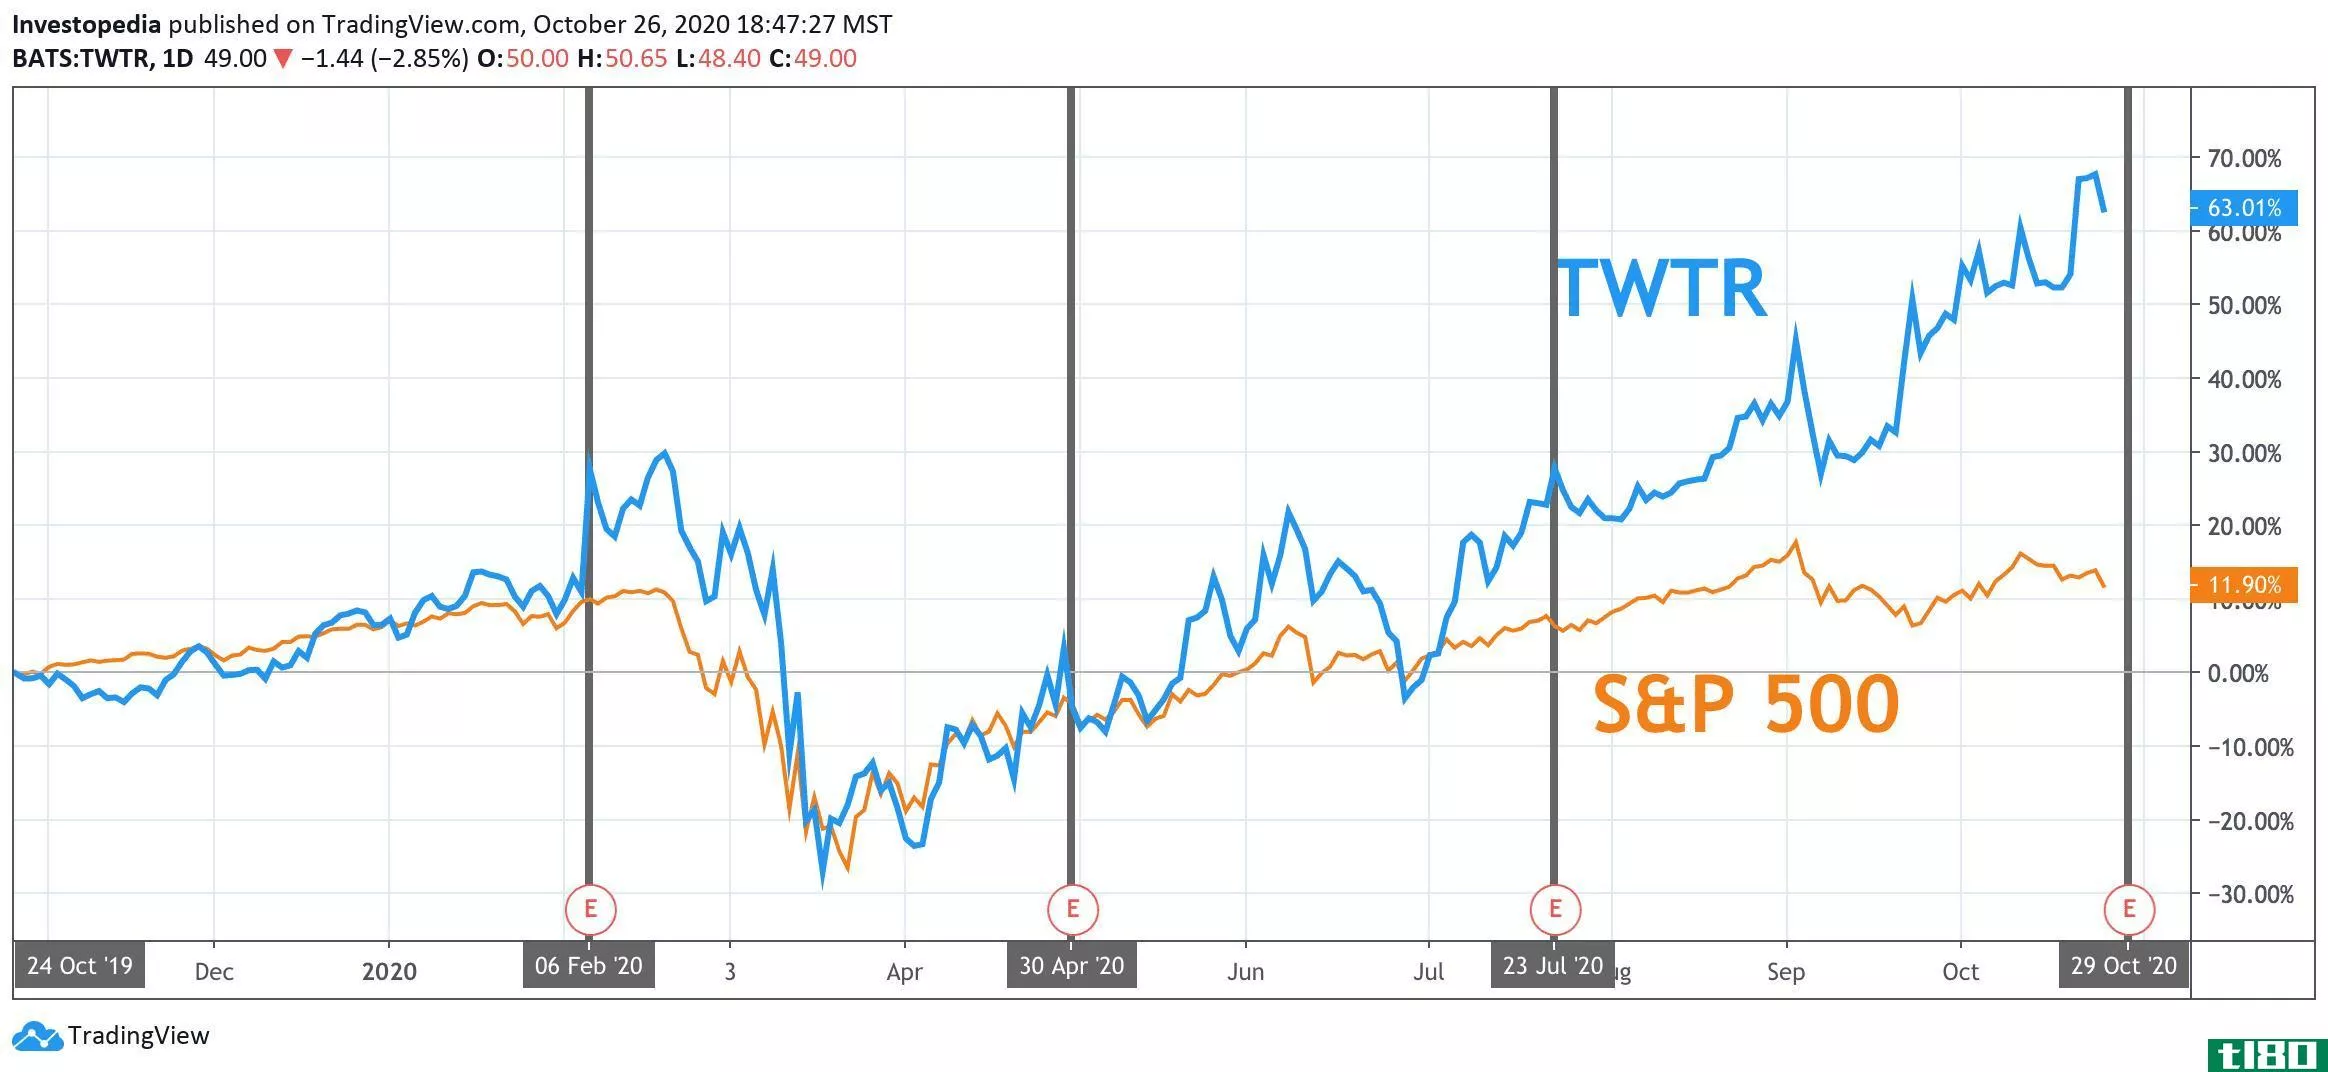 One Year Total Return for S&P 500 and Twitter